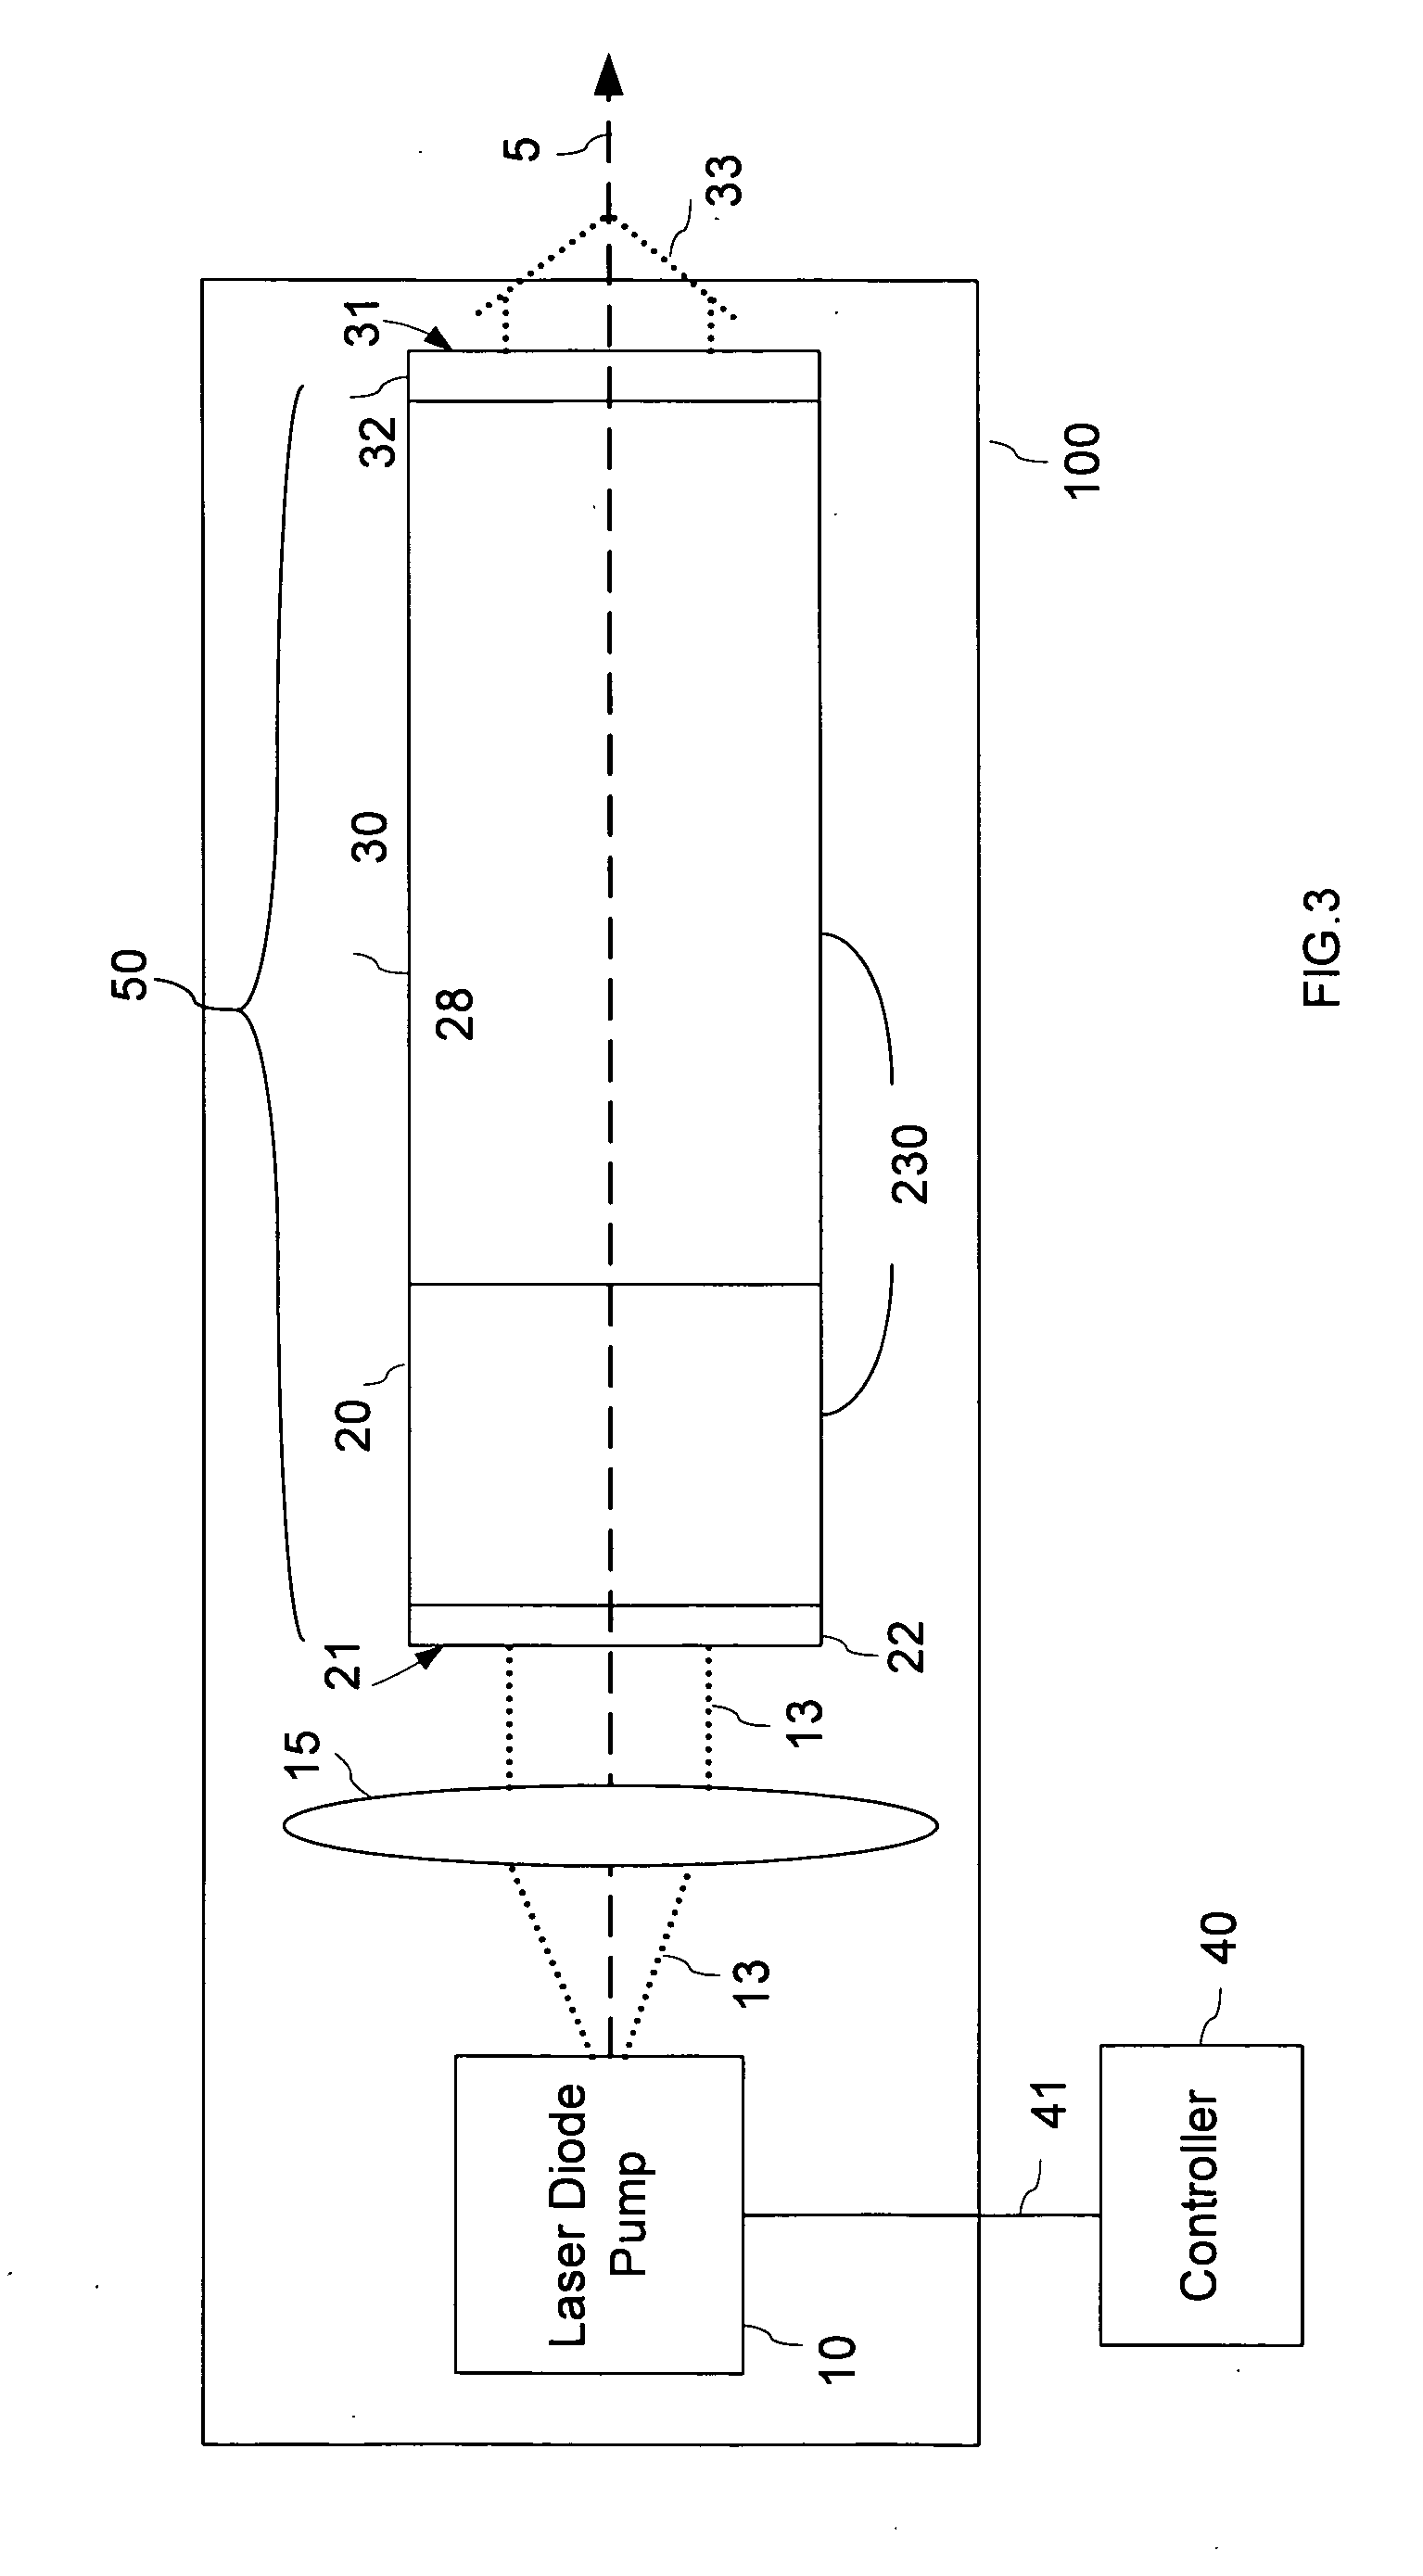 Passively Q-switched laser with adjustable pulse repetition rate